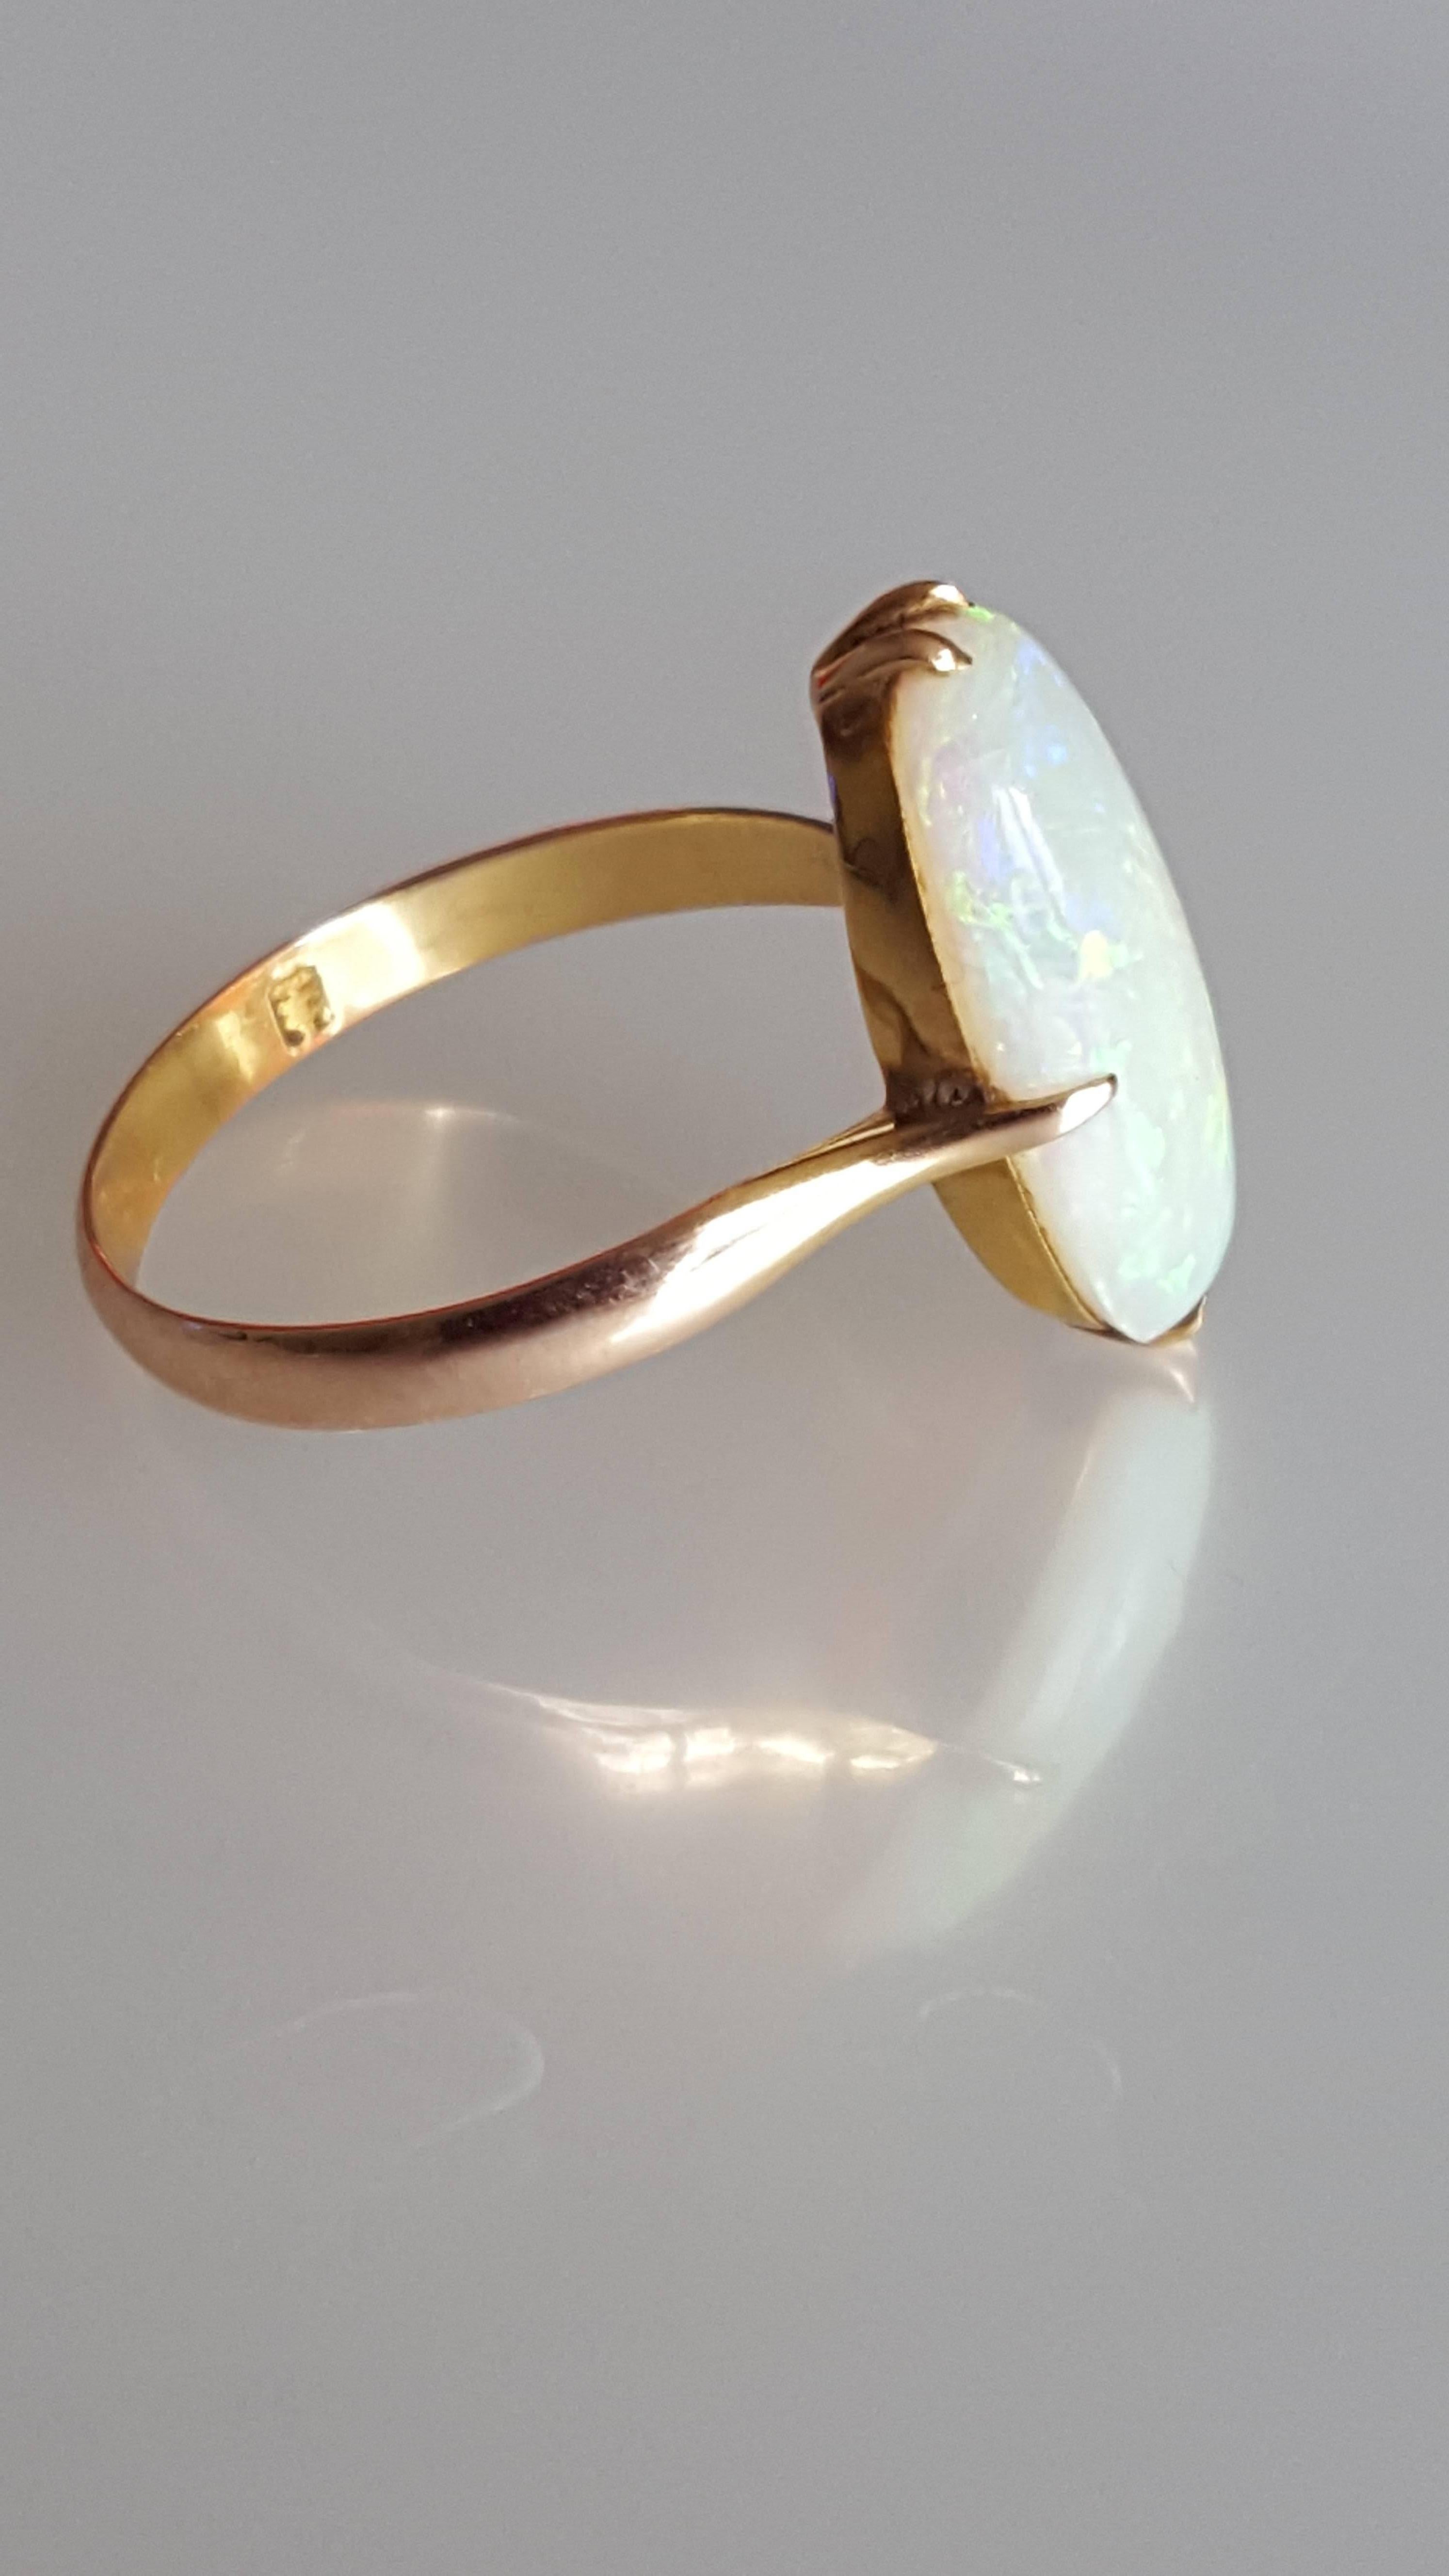 A Beautiful Art Deco c.1920s/30s  18 Carat Gold and Australian Opal ring. October birthstone. 
Size 6.5 US, M UK. 
Height of the face 17mm 
Marked for 18 Carat Gold 
Excellent condition for the age and ready to wear. 